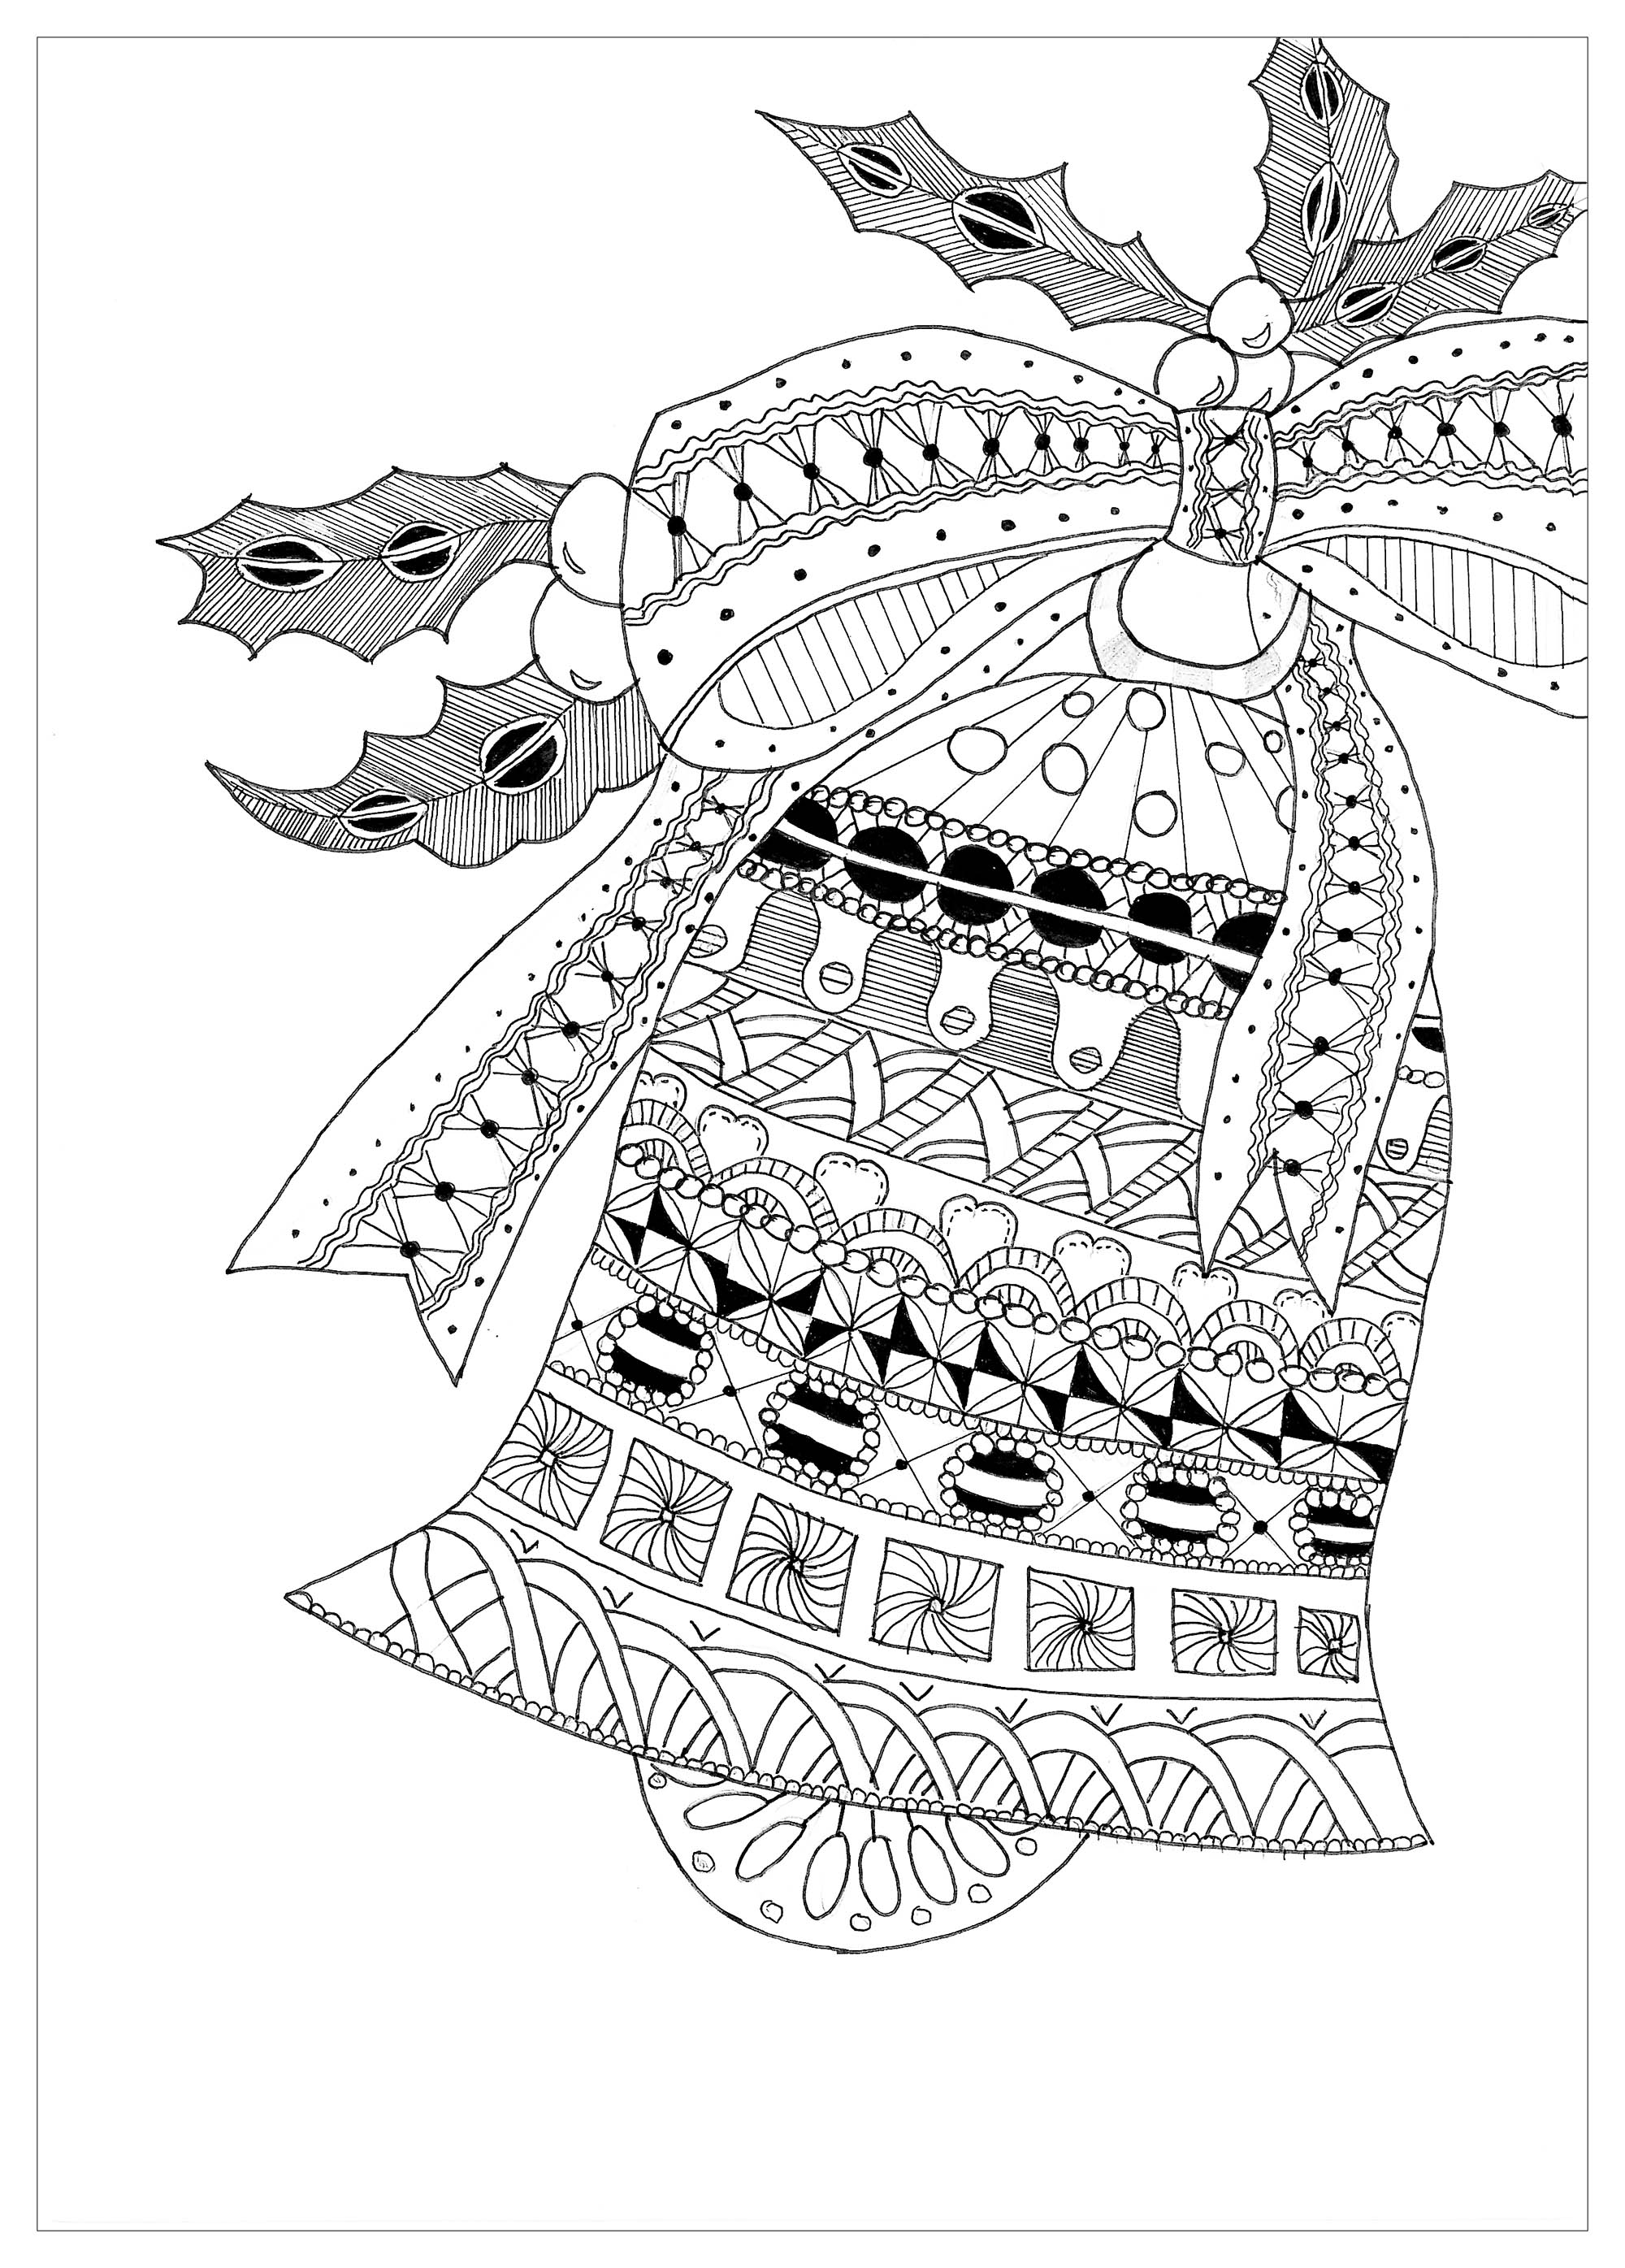 Coloring page of a Christmas bell with zentangle patterns, Artist : Krissy